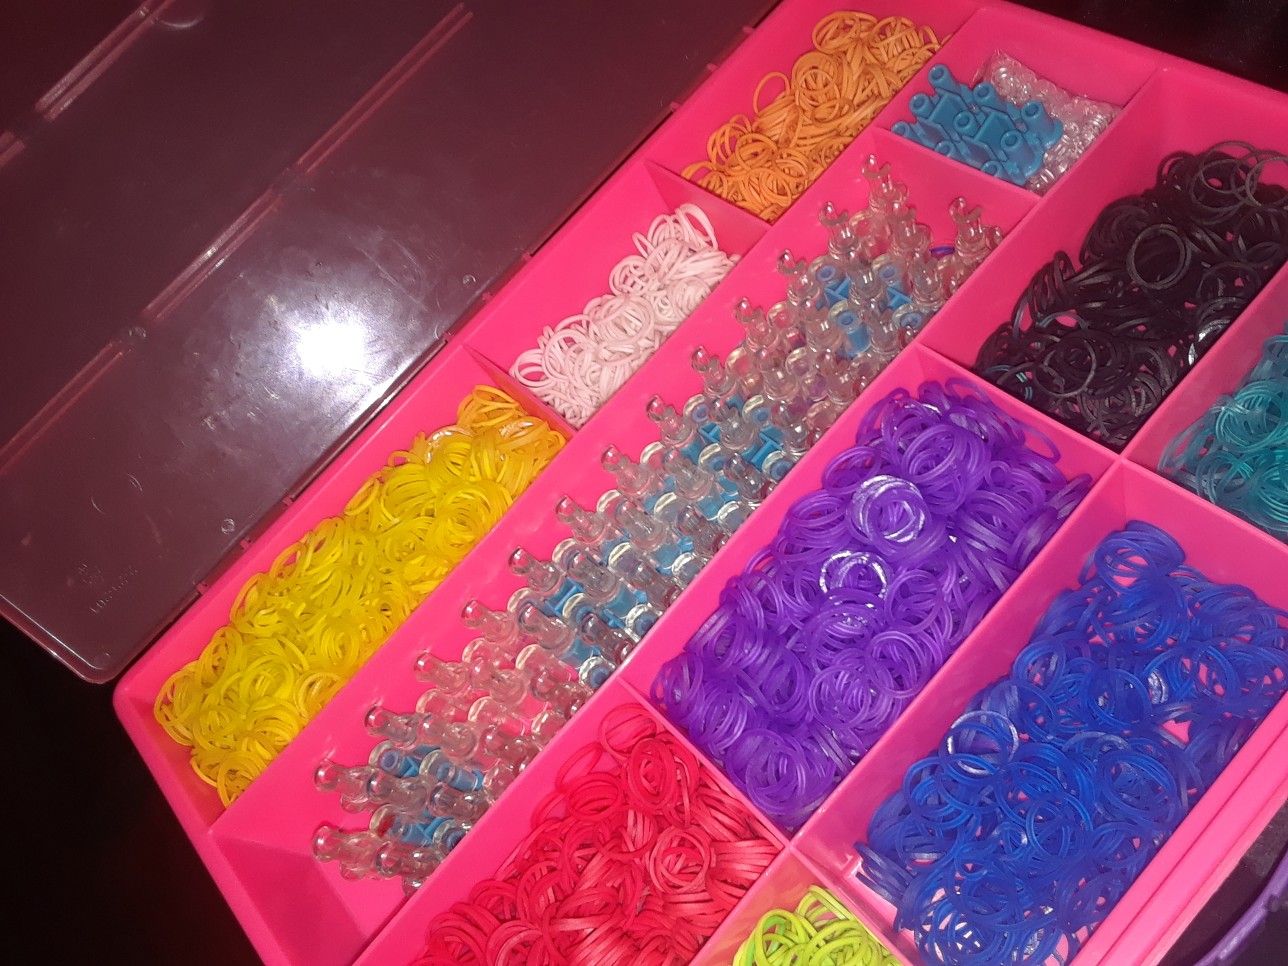 Rainbow loom kit with multi colored bands